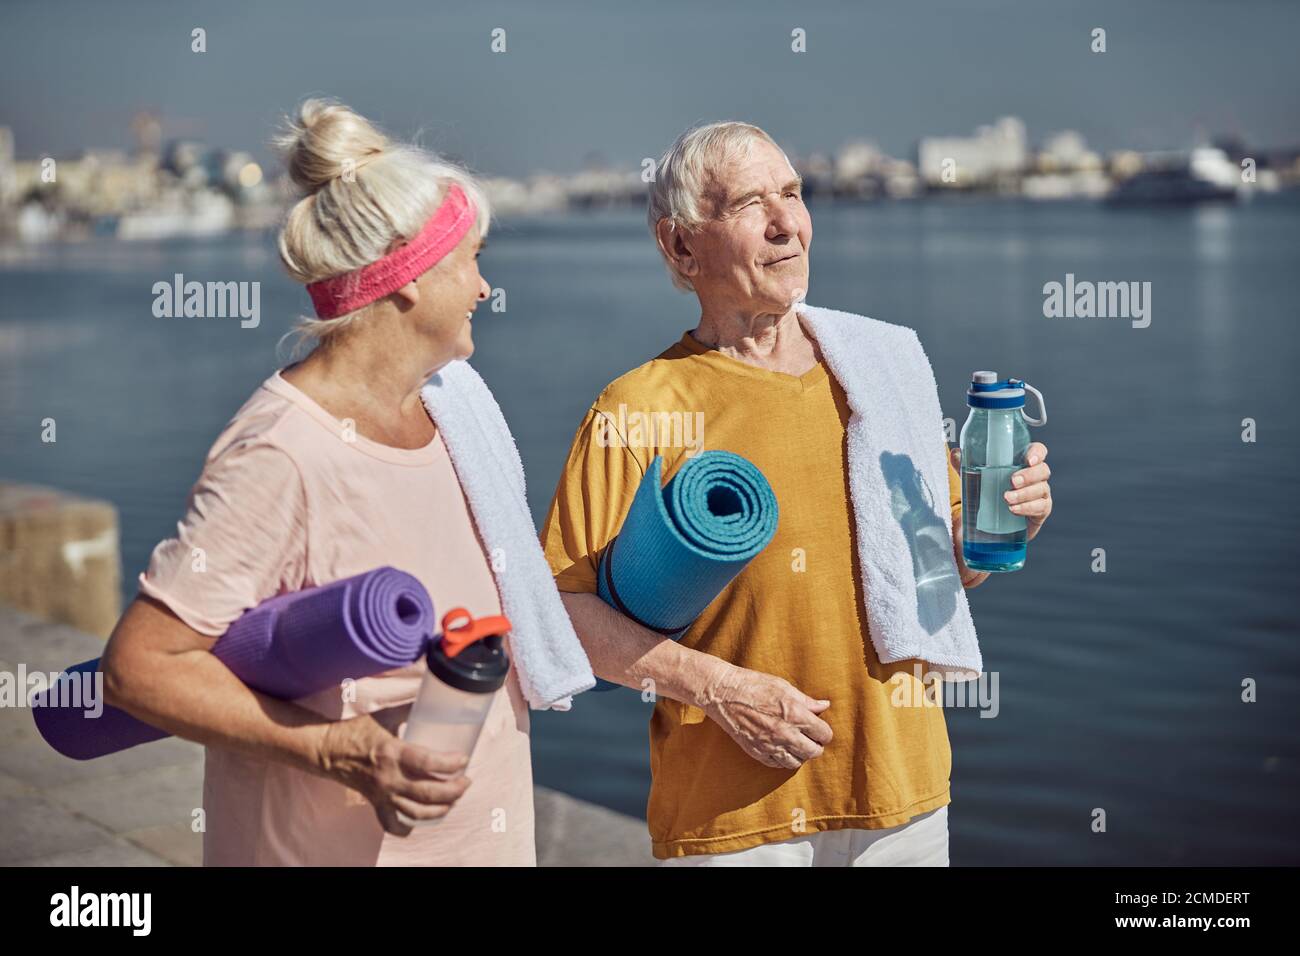 Two pensioners standing on the river bank Stock Photo